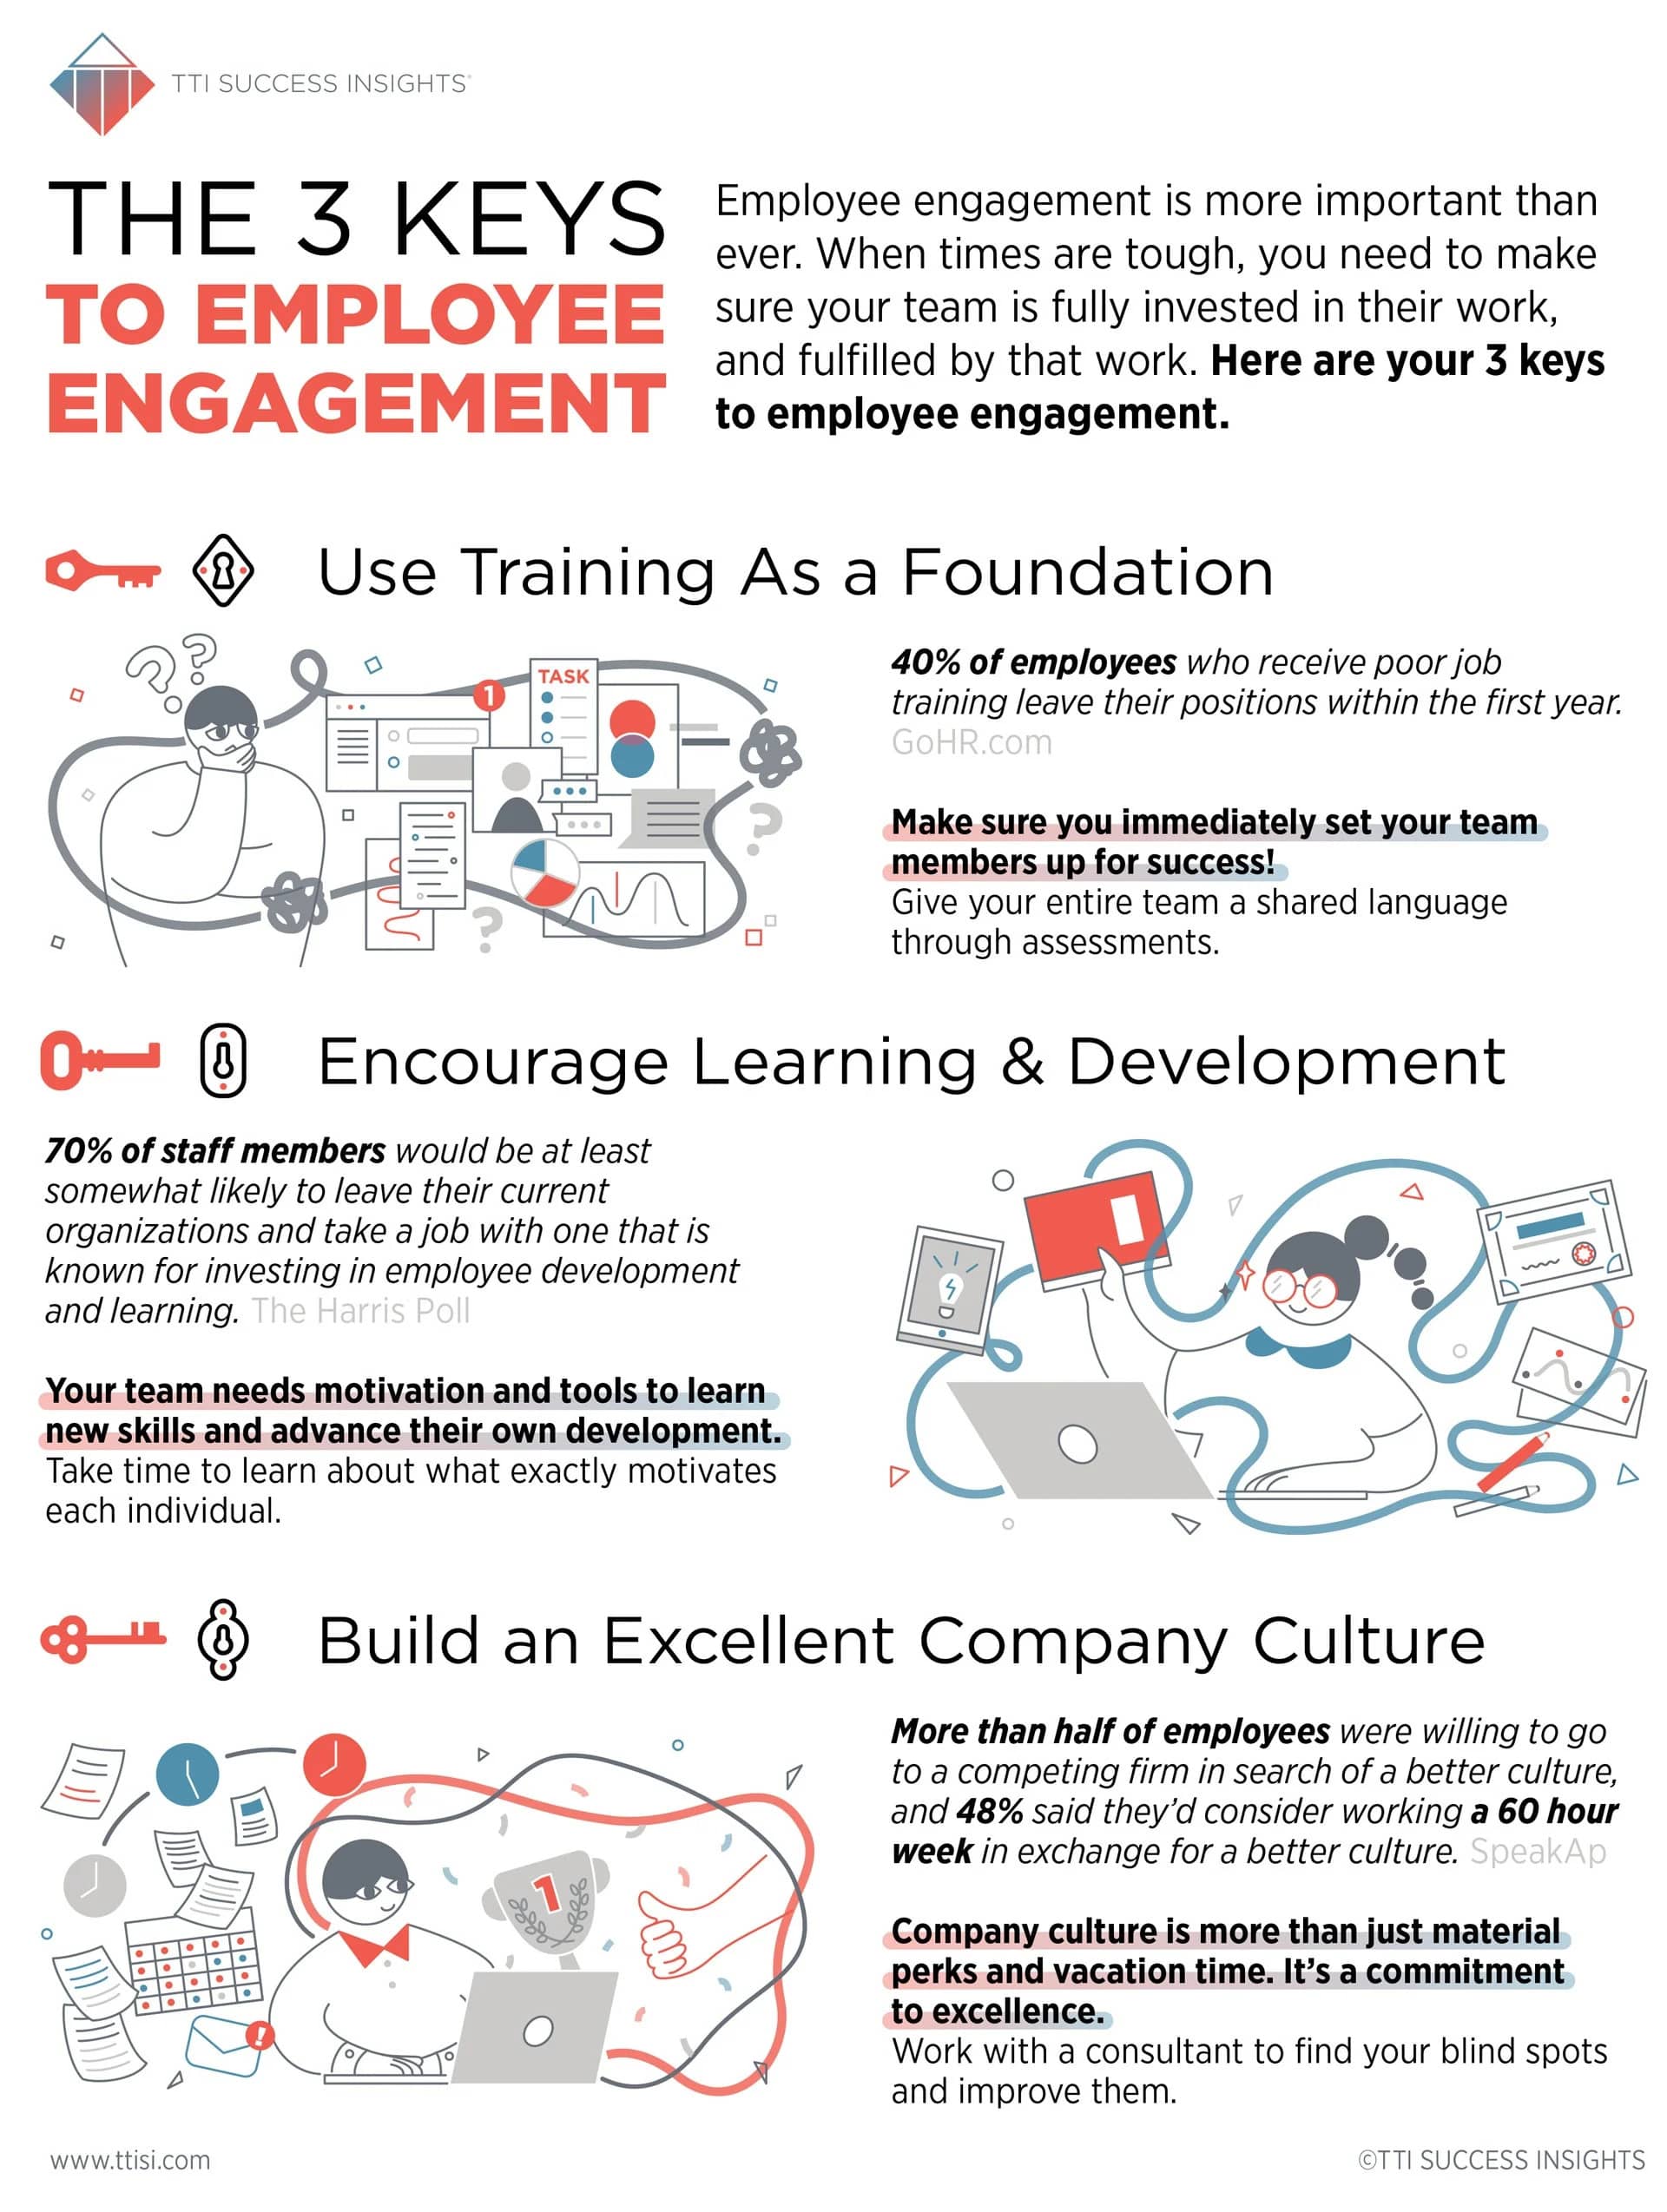 The 3 Keys to Employee Engagement - Infographic